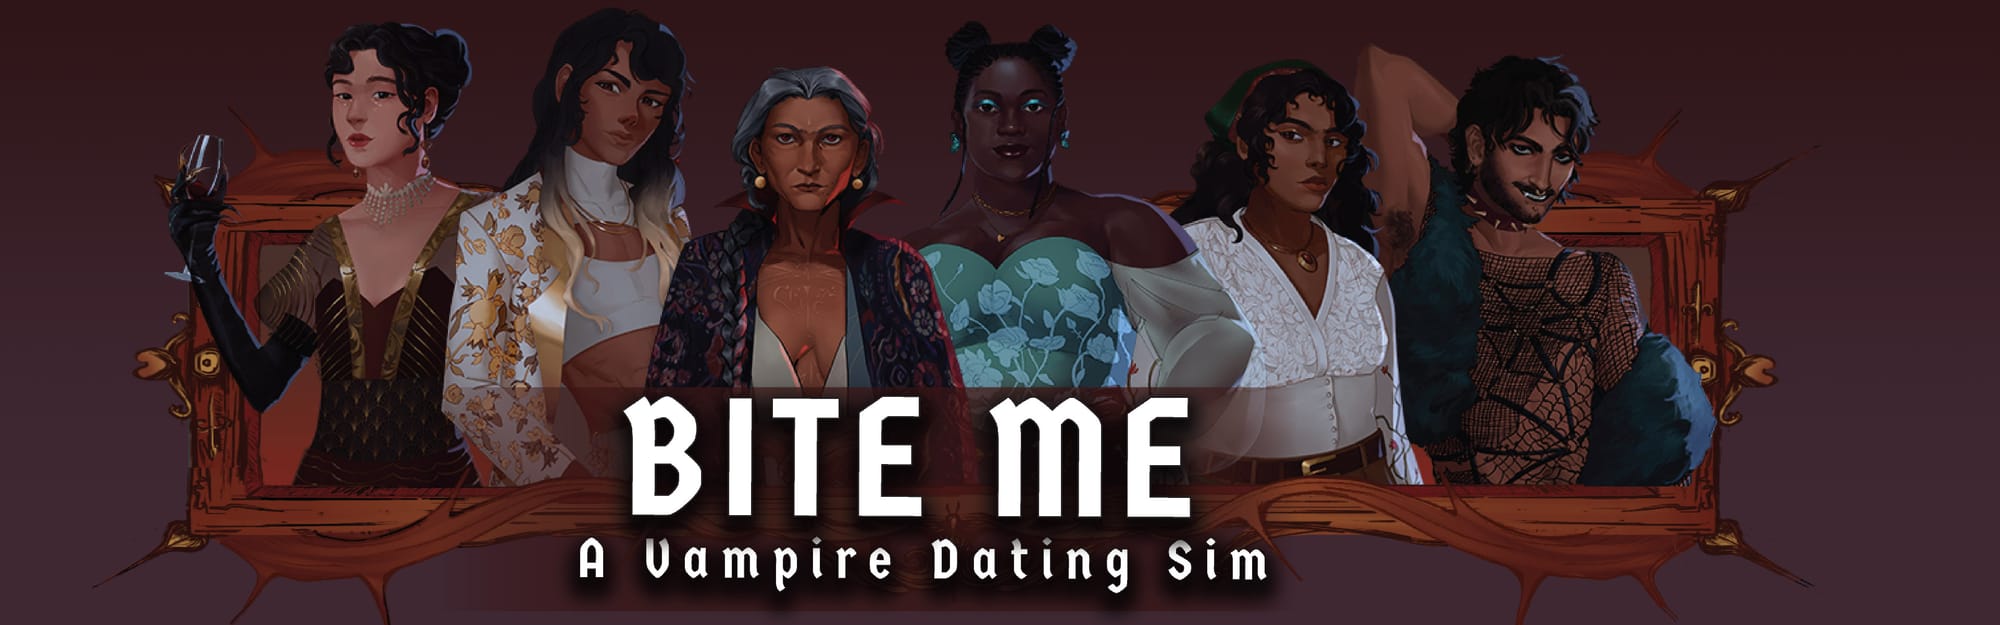 Bite Me: A Queer Vampire Dating Simulator Unveils Kickstarter Campaign for a Thrilling Horror-Romance Adventure